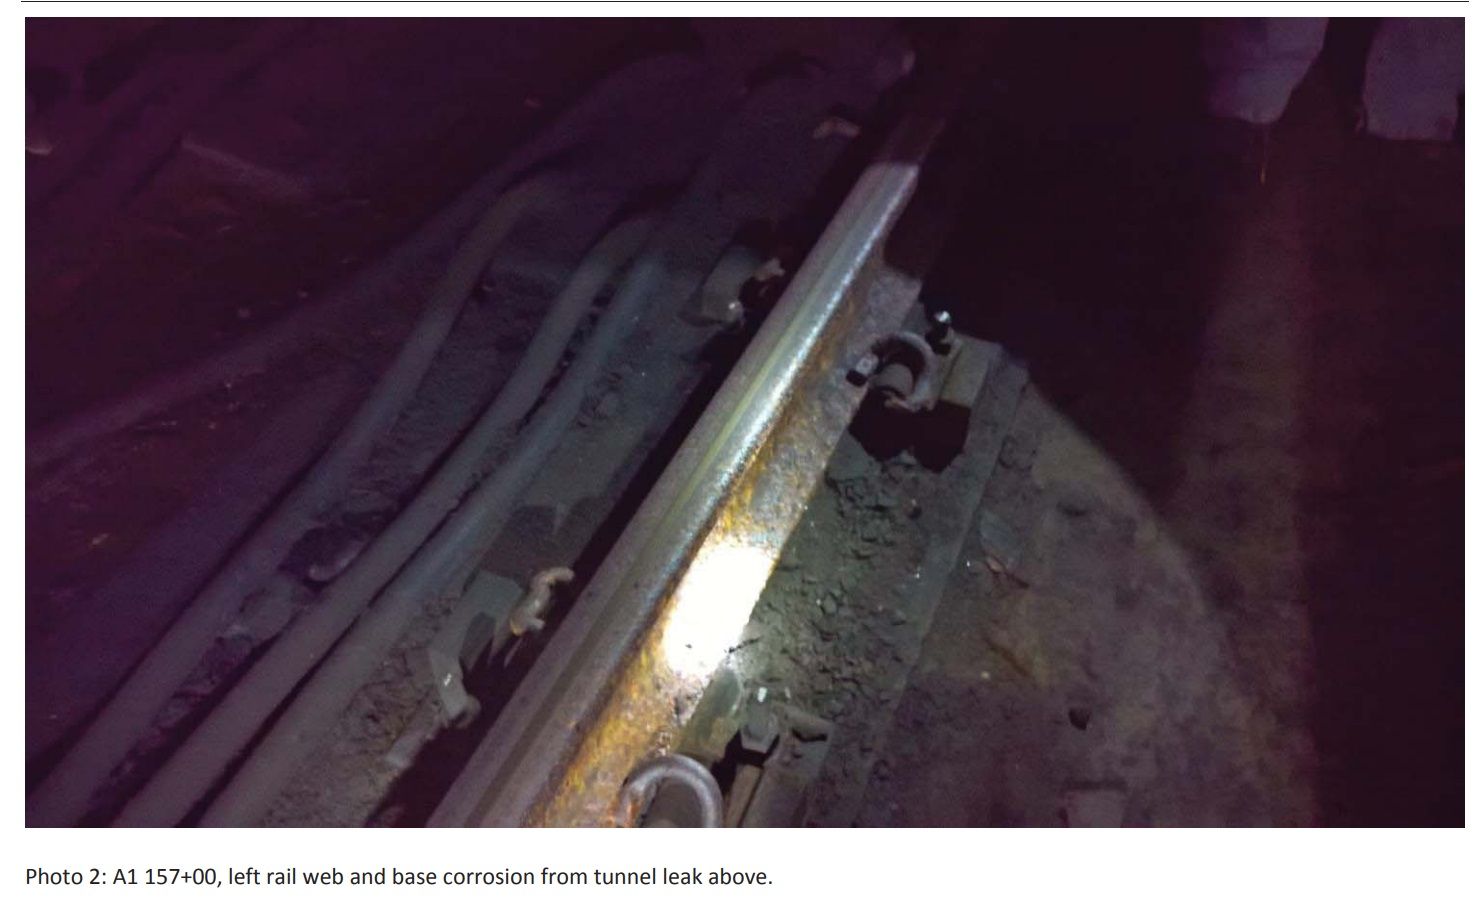 Tunnel leak and rail rusting on Metro's Red Line between Woodley Park and Tenley. (Photo courtesy FTA)